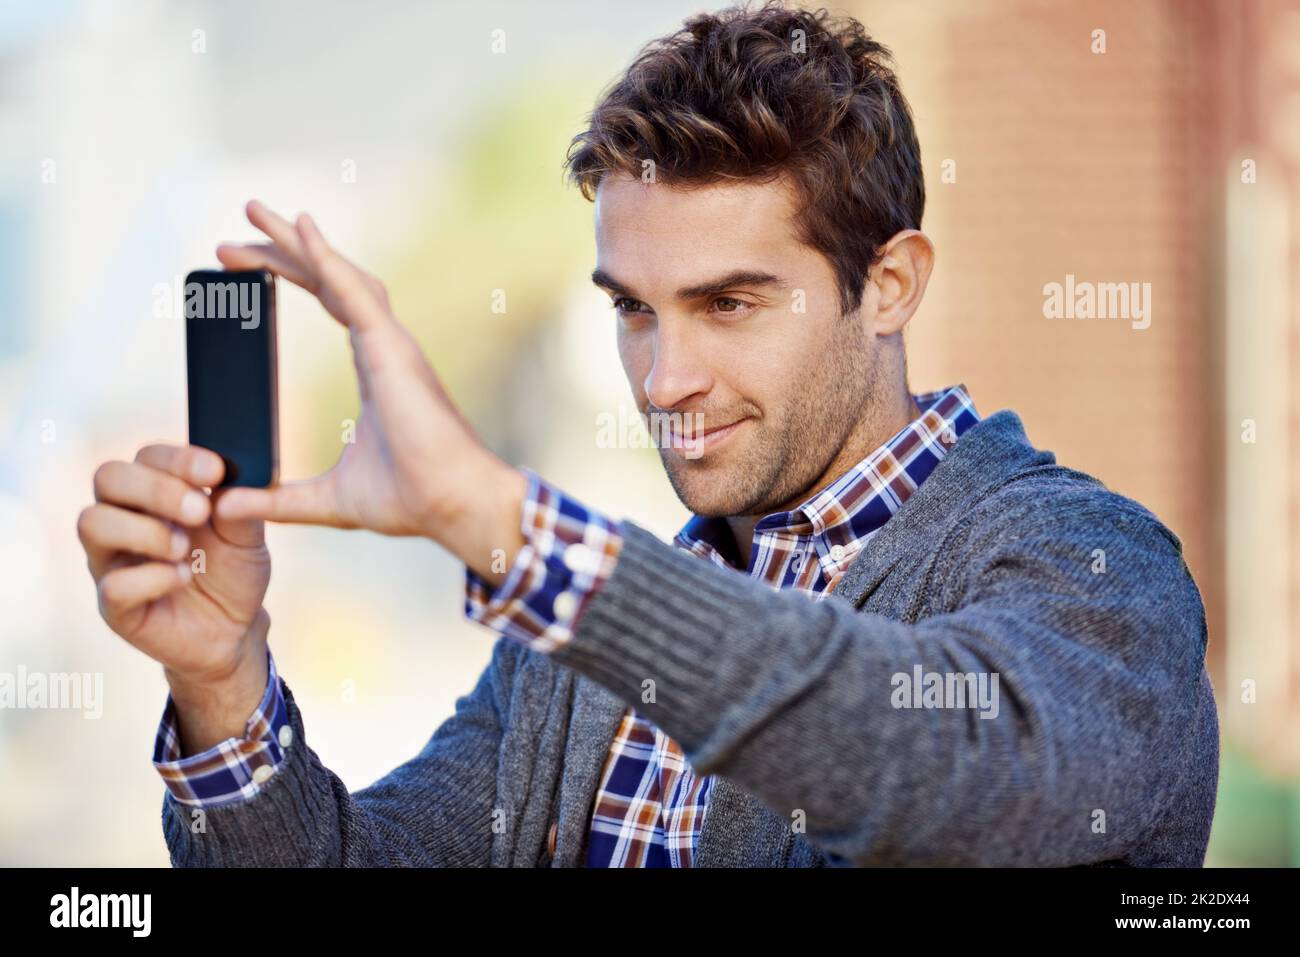 Phone photography. Shot of a handsome young man taking a photograph with his mobile phone phone outdoors. Stock Photo